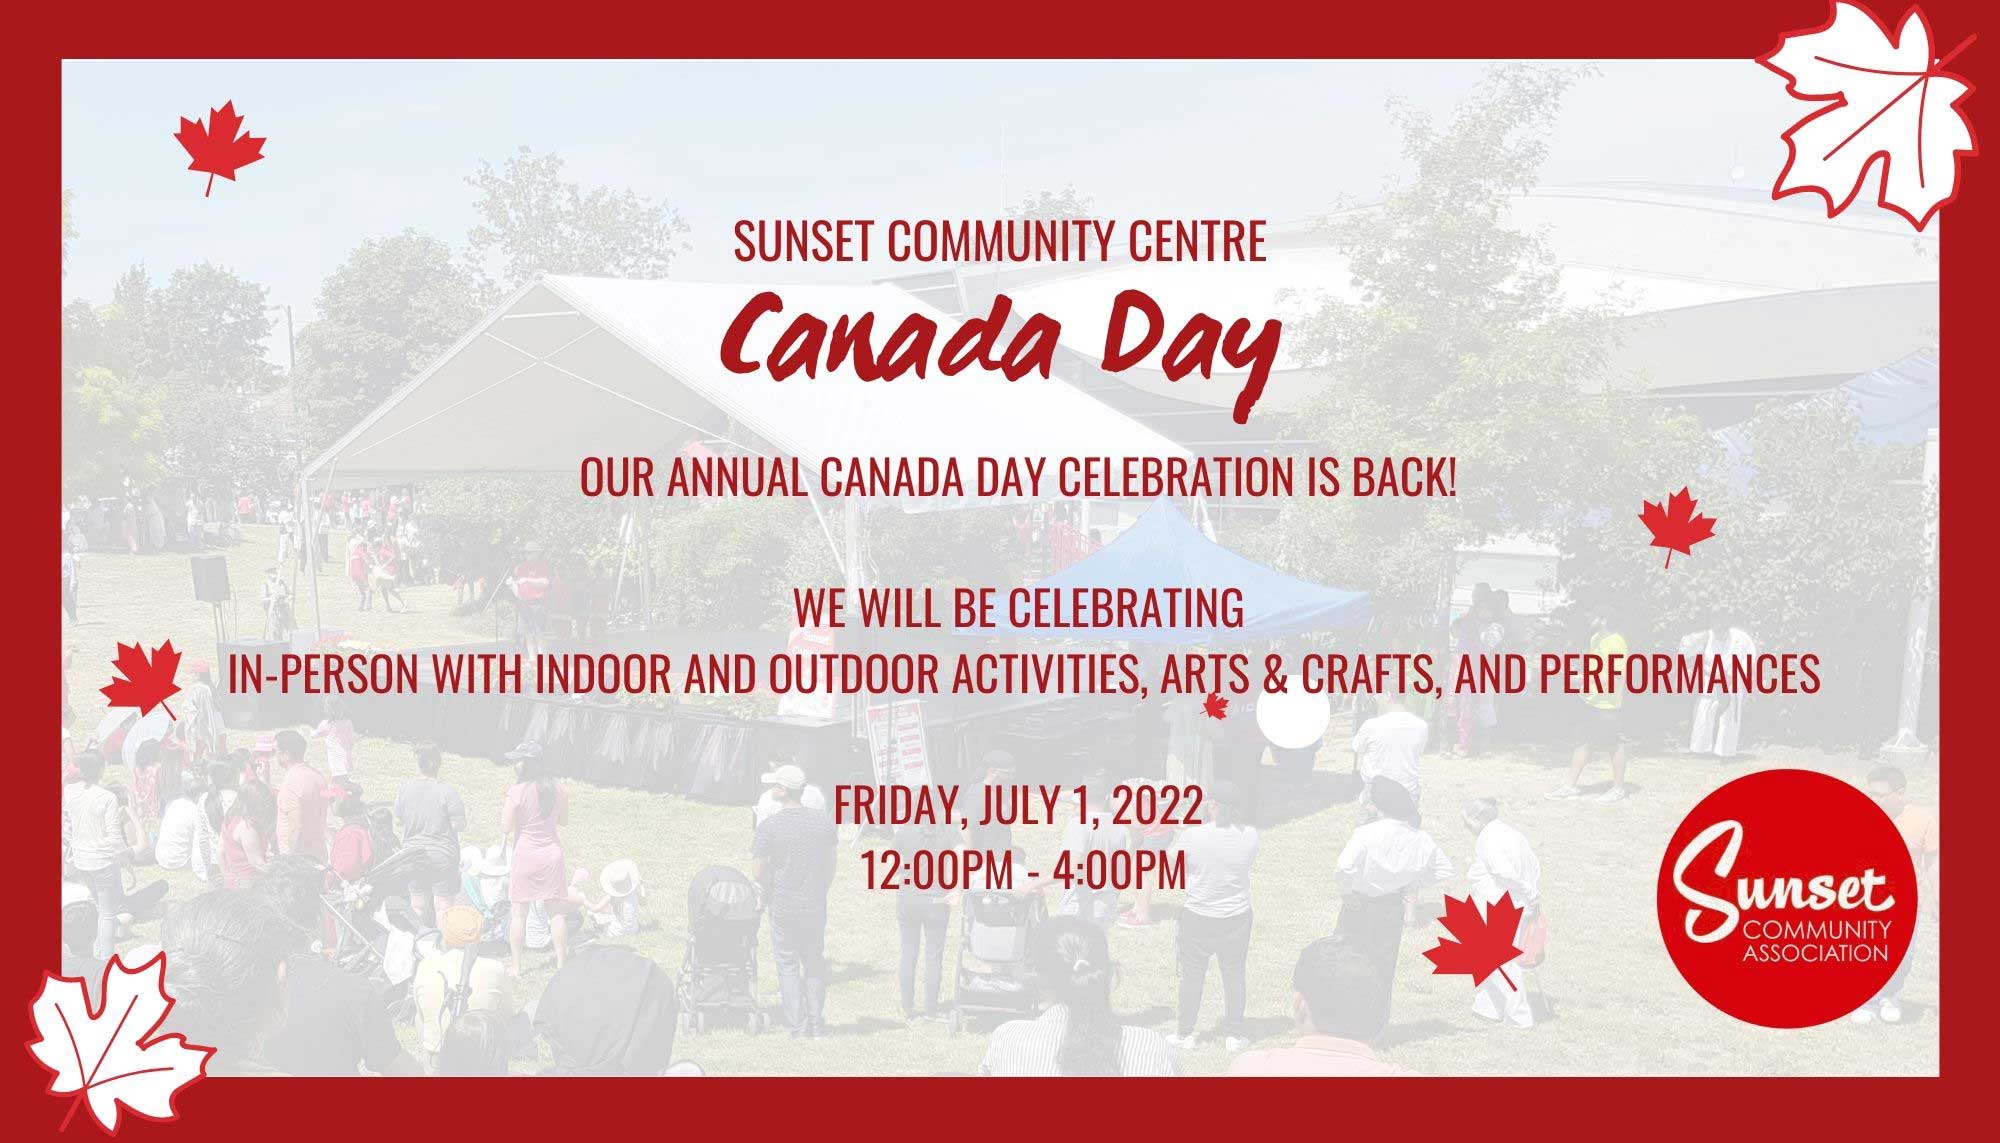 Sunset Community Centre Canada Day Our Annual Canada Day Celebration is back! We will be celebrating in-person with indoor and outdoor activities, arts & crafts and performances Friday July 1 12-4pm See you there!